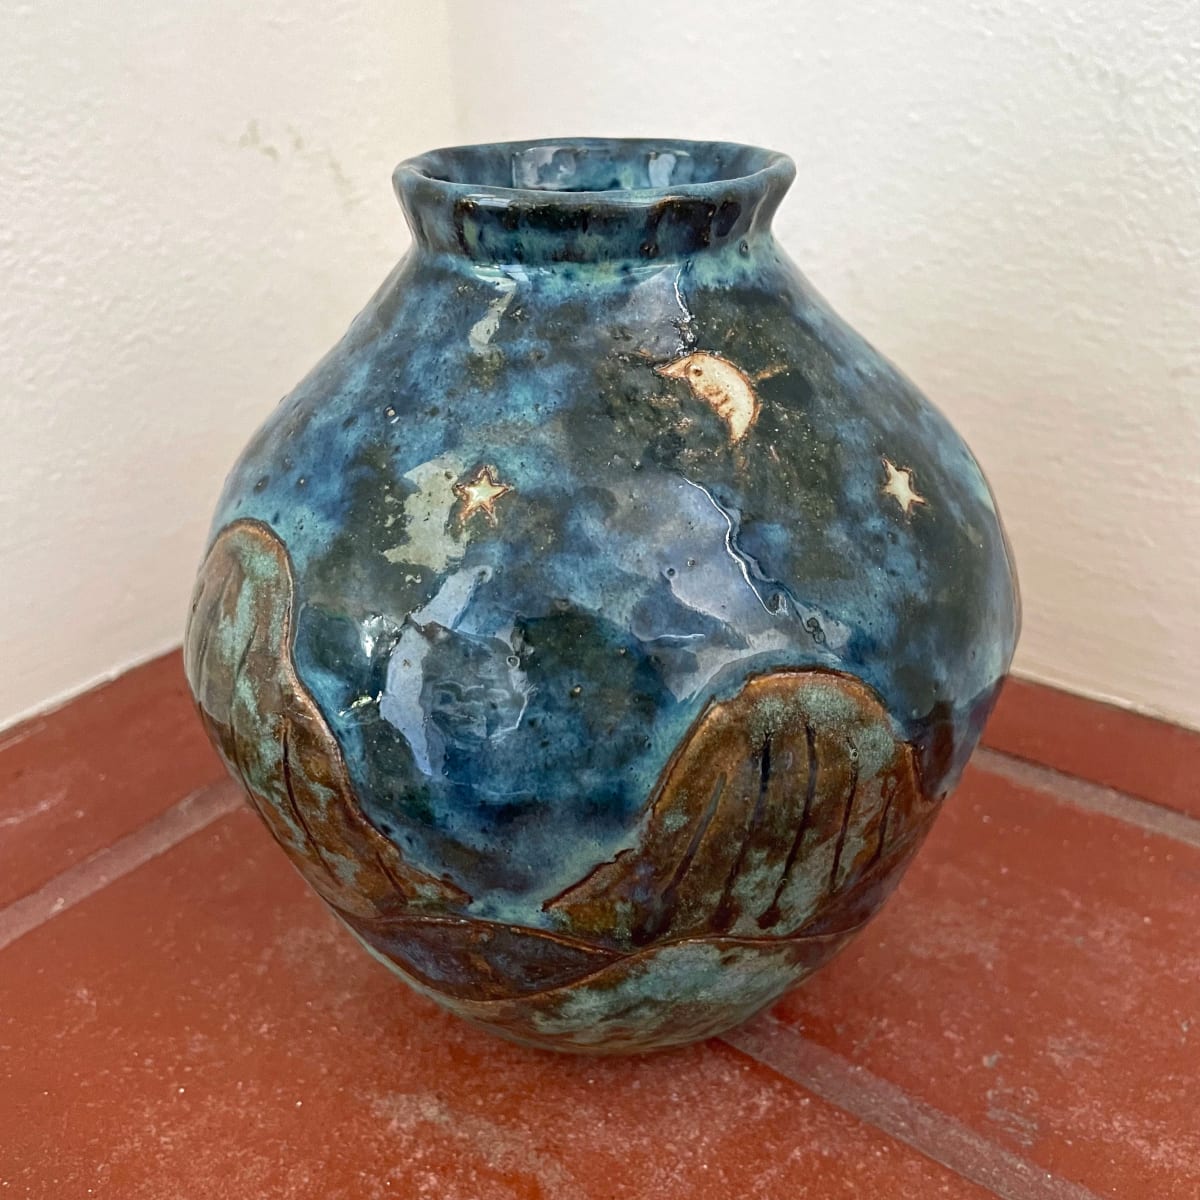 Starry Night and Mountains, a Landscape Vase by Nell Eakin  Image: The Starry Night Vase